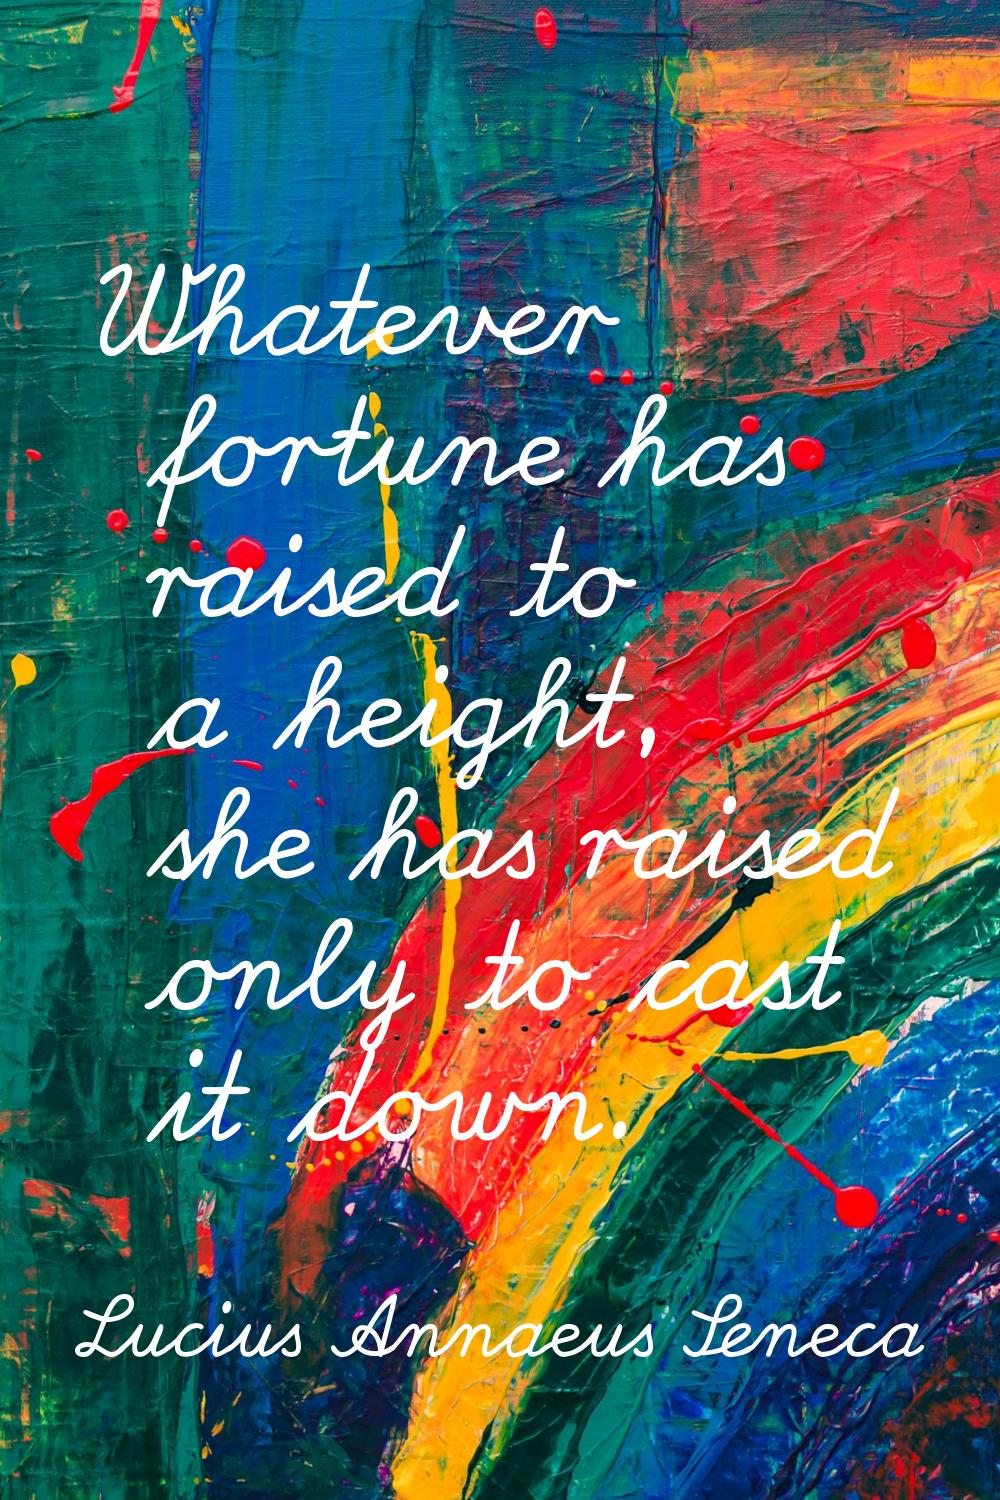 Whatever fortune has raised to a height, she has raised only to cast it down.